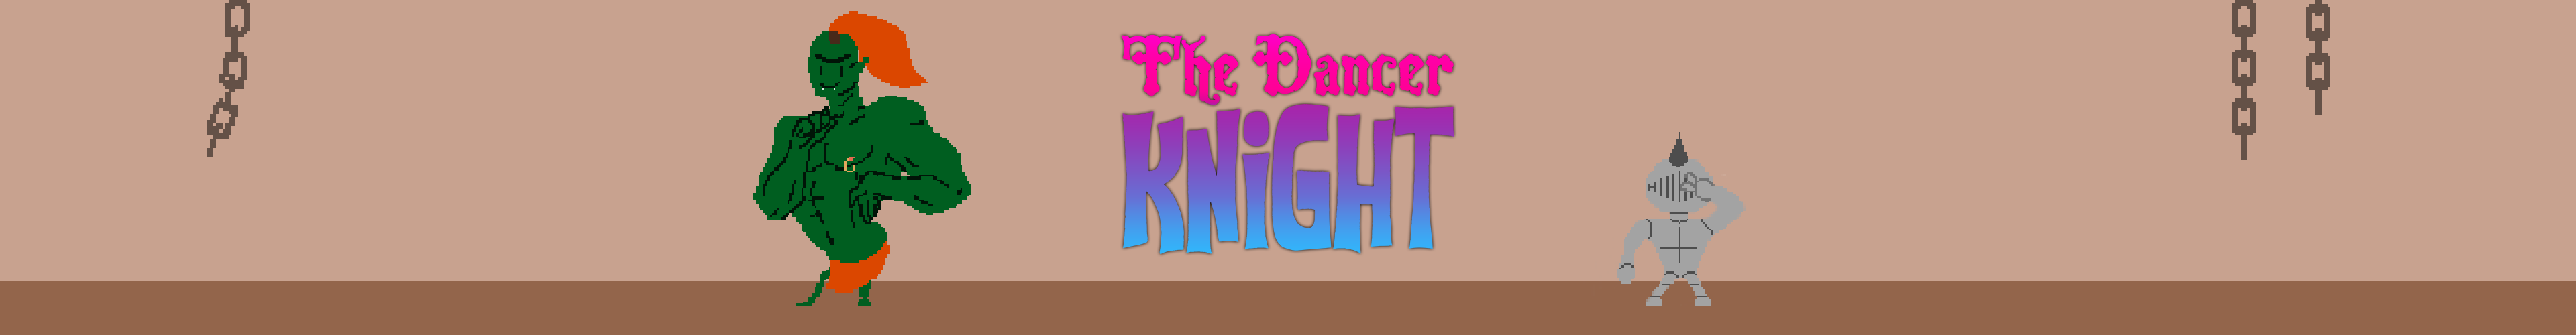 The Dancer Knight